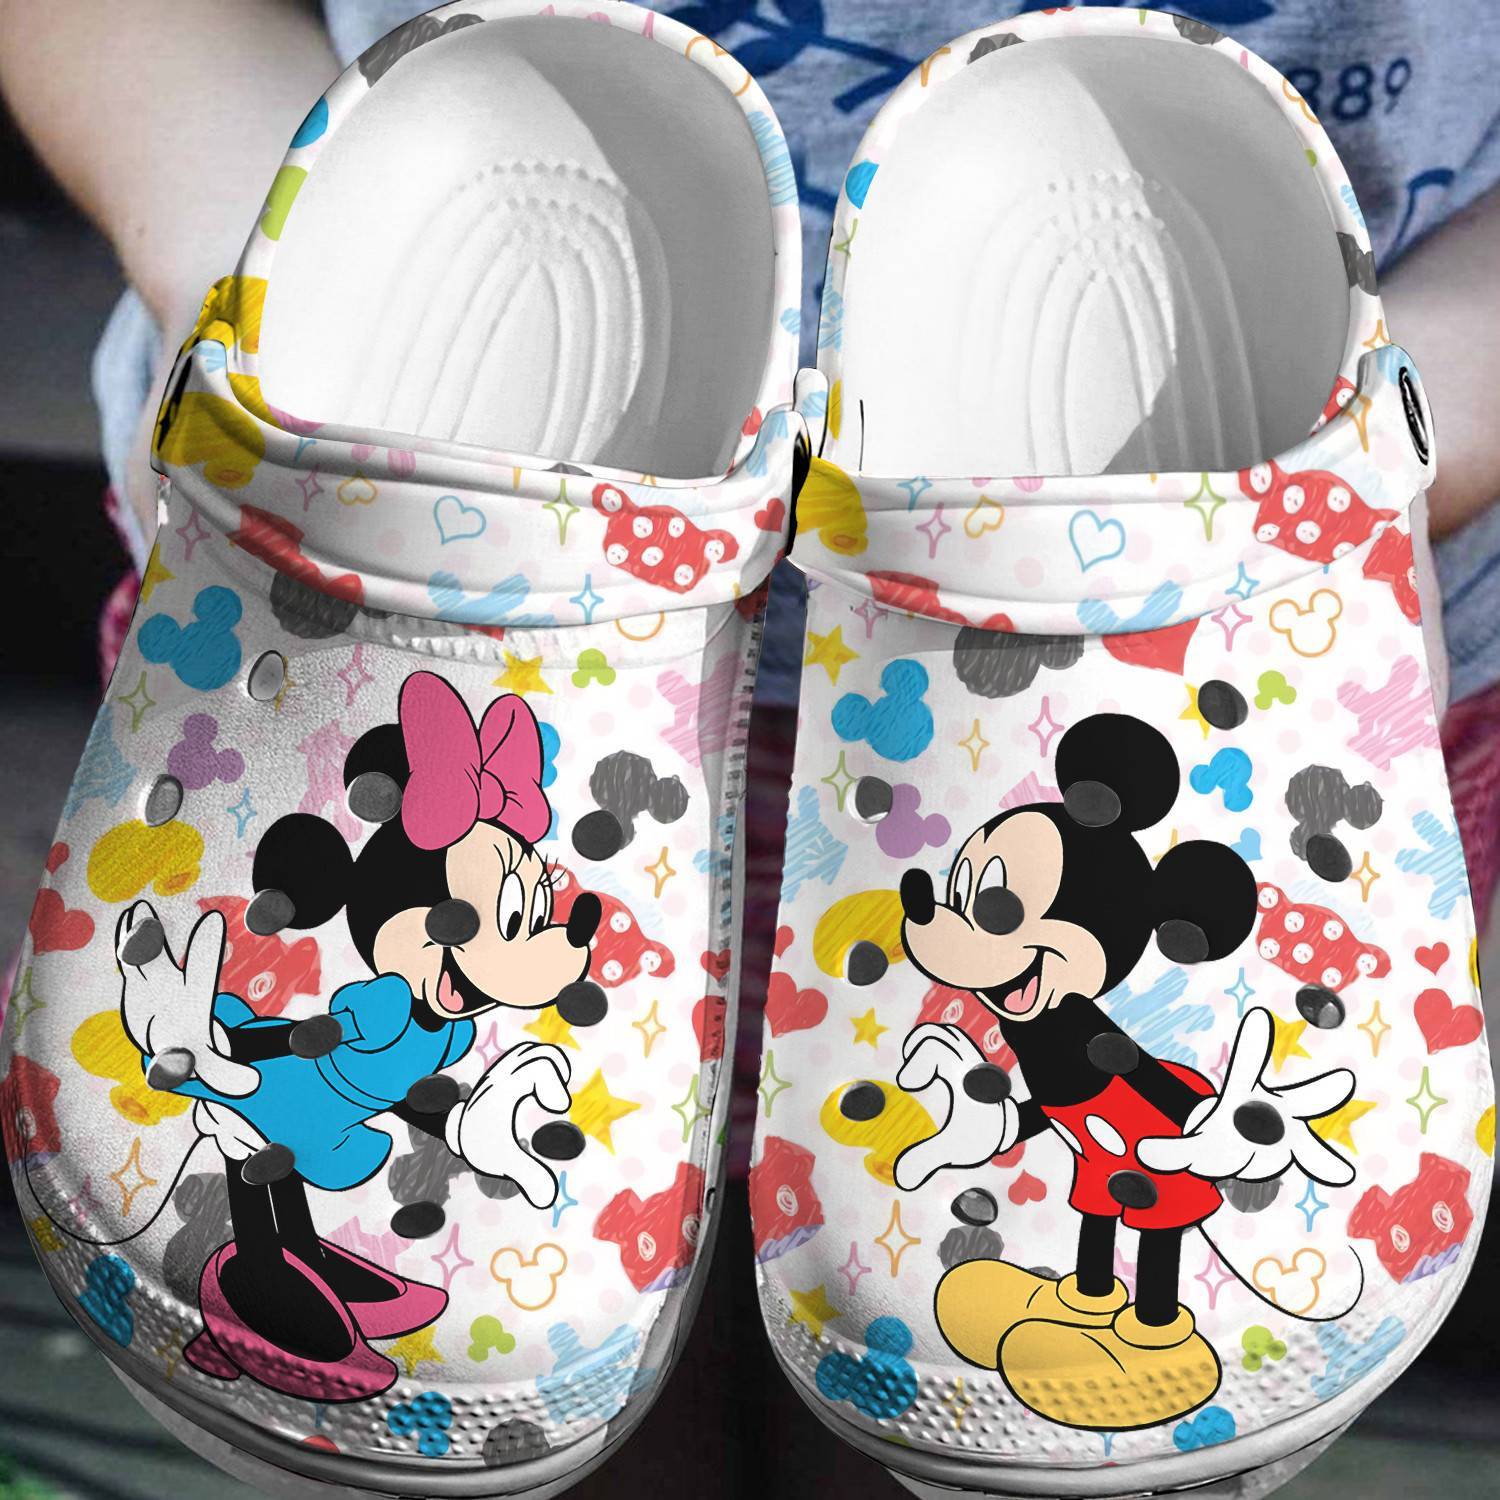 Disney Fashion Statement: Mickey Minnie Crocs 3D Clog Shoes – Be the Style Star